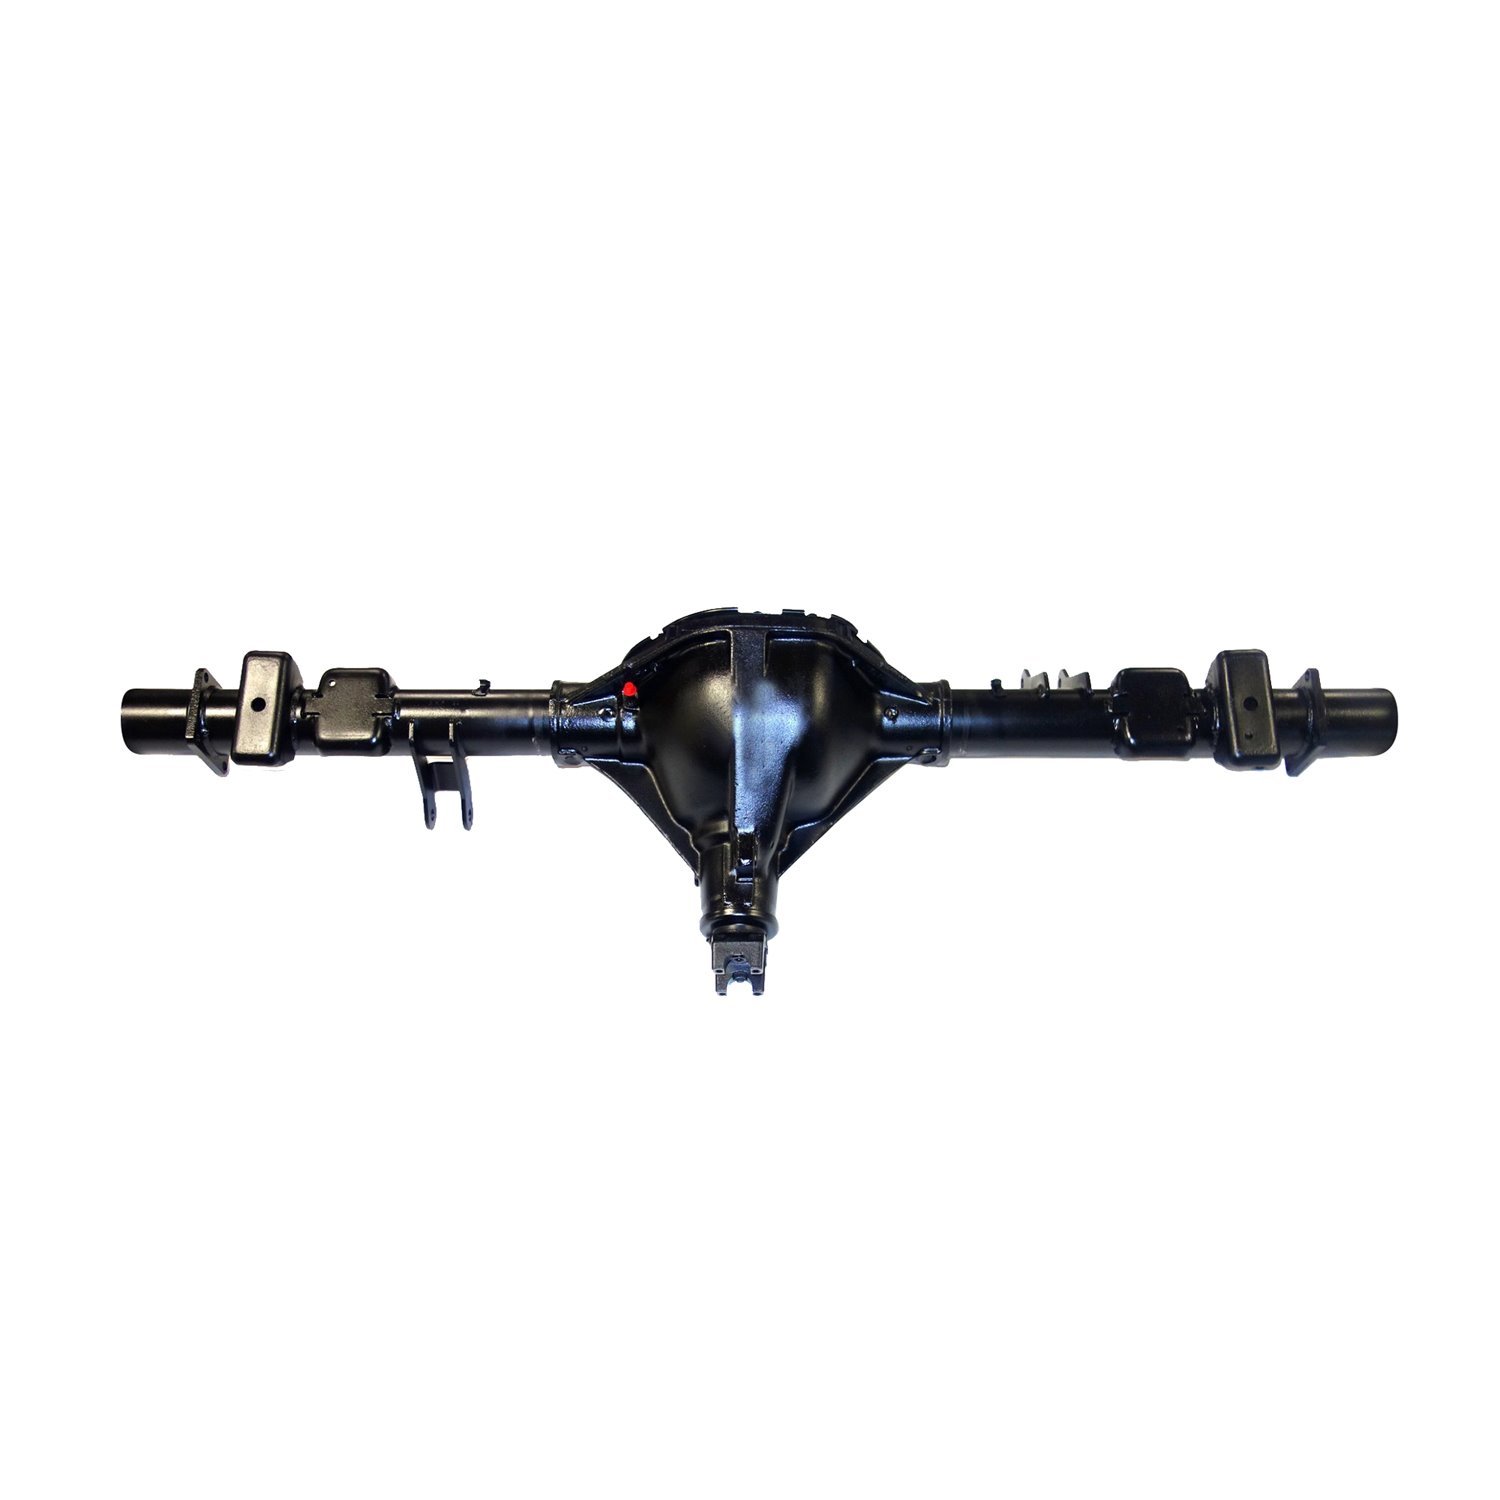 Remanufactured Complete Axle Assy for GM 9.5" 03-05 Hummer H2 4.11 with Electric Locker